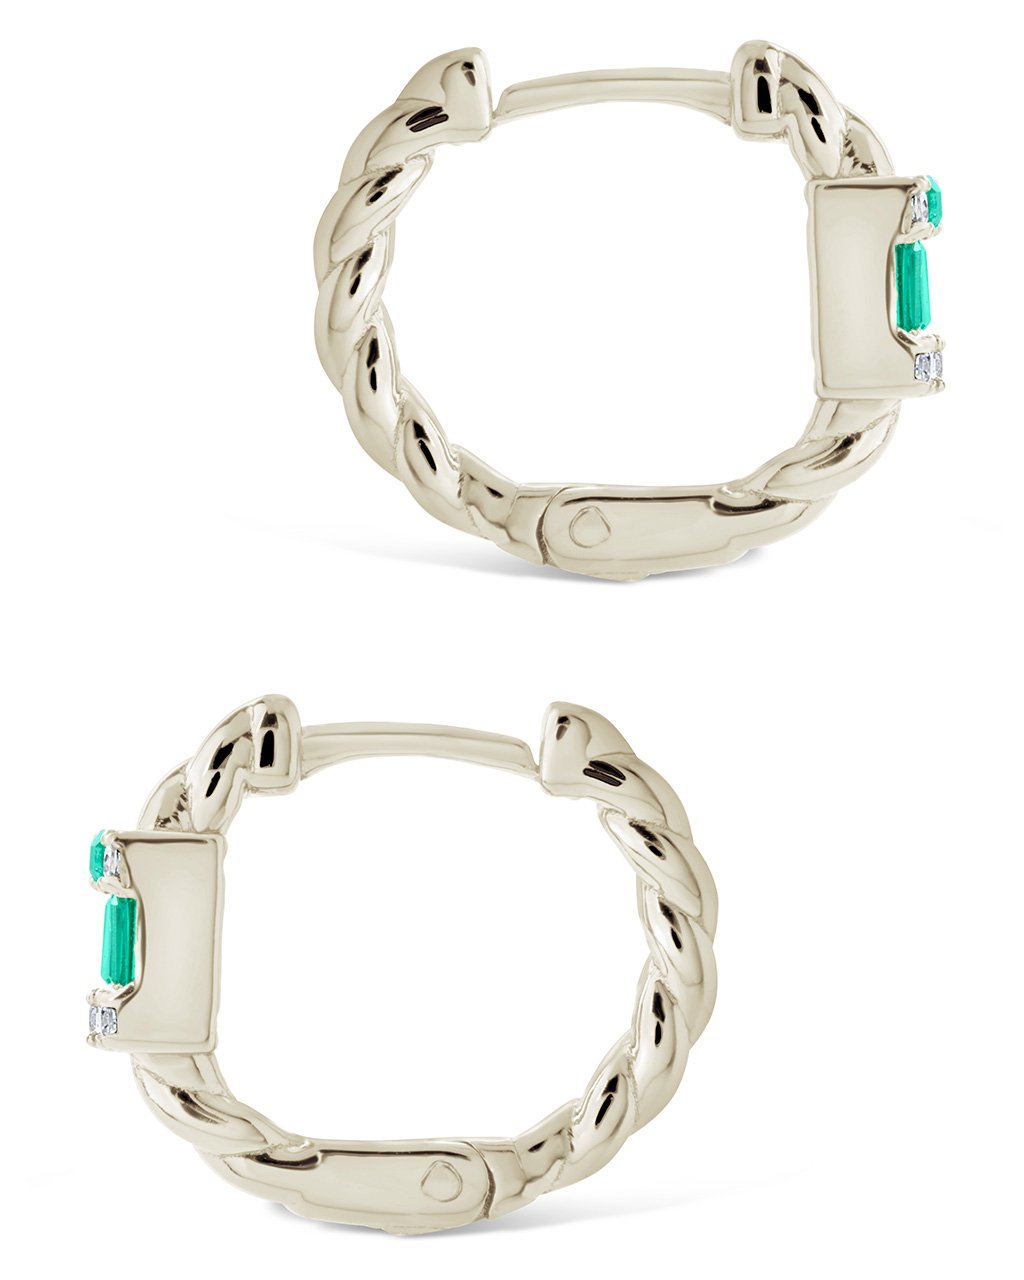 Sterling Silver Braided Micro Hoops with Emerald Baguette CZ Stones Earring Sterling Forever 